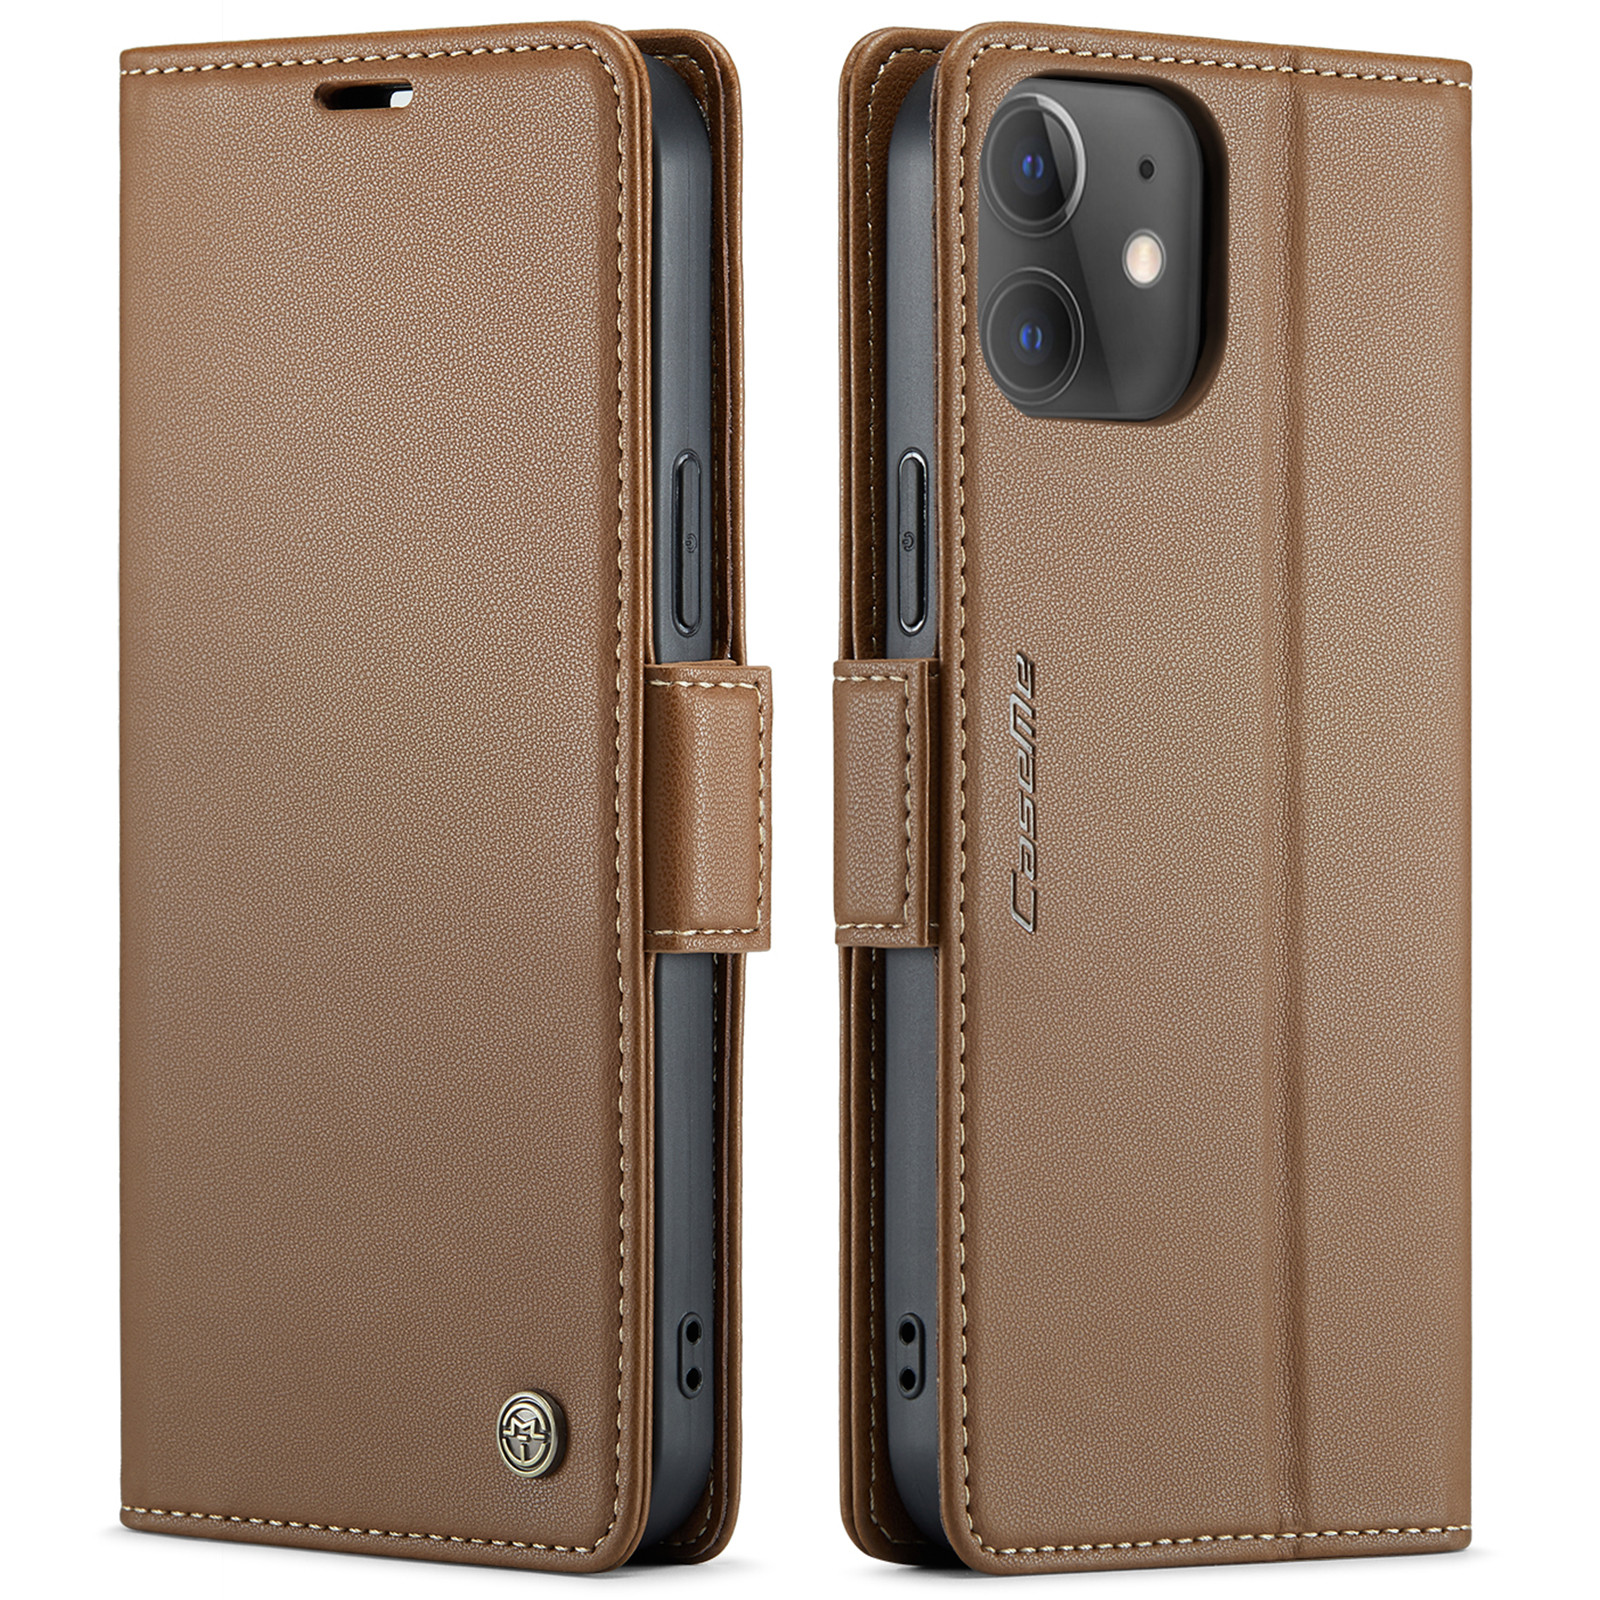 CaseMe iPhone 13 Pro Max Leather Zipper Wallet Case with RFID Blocking  Credit Card Holder Brown